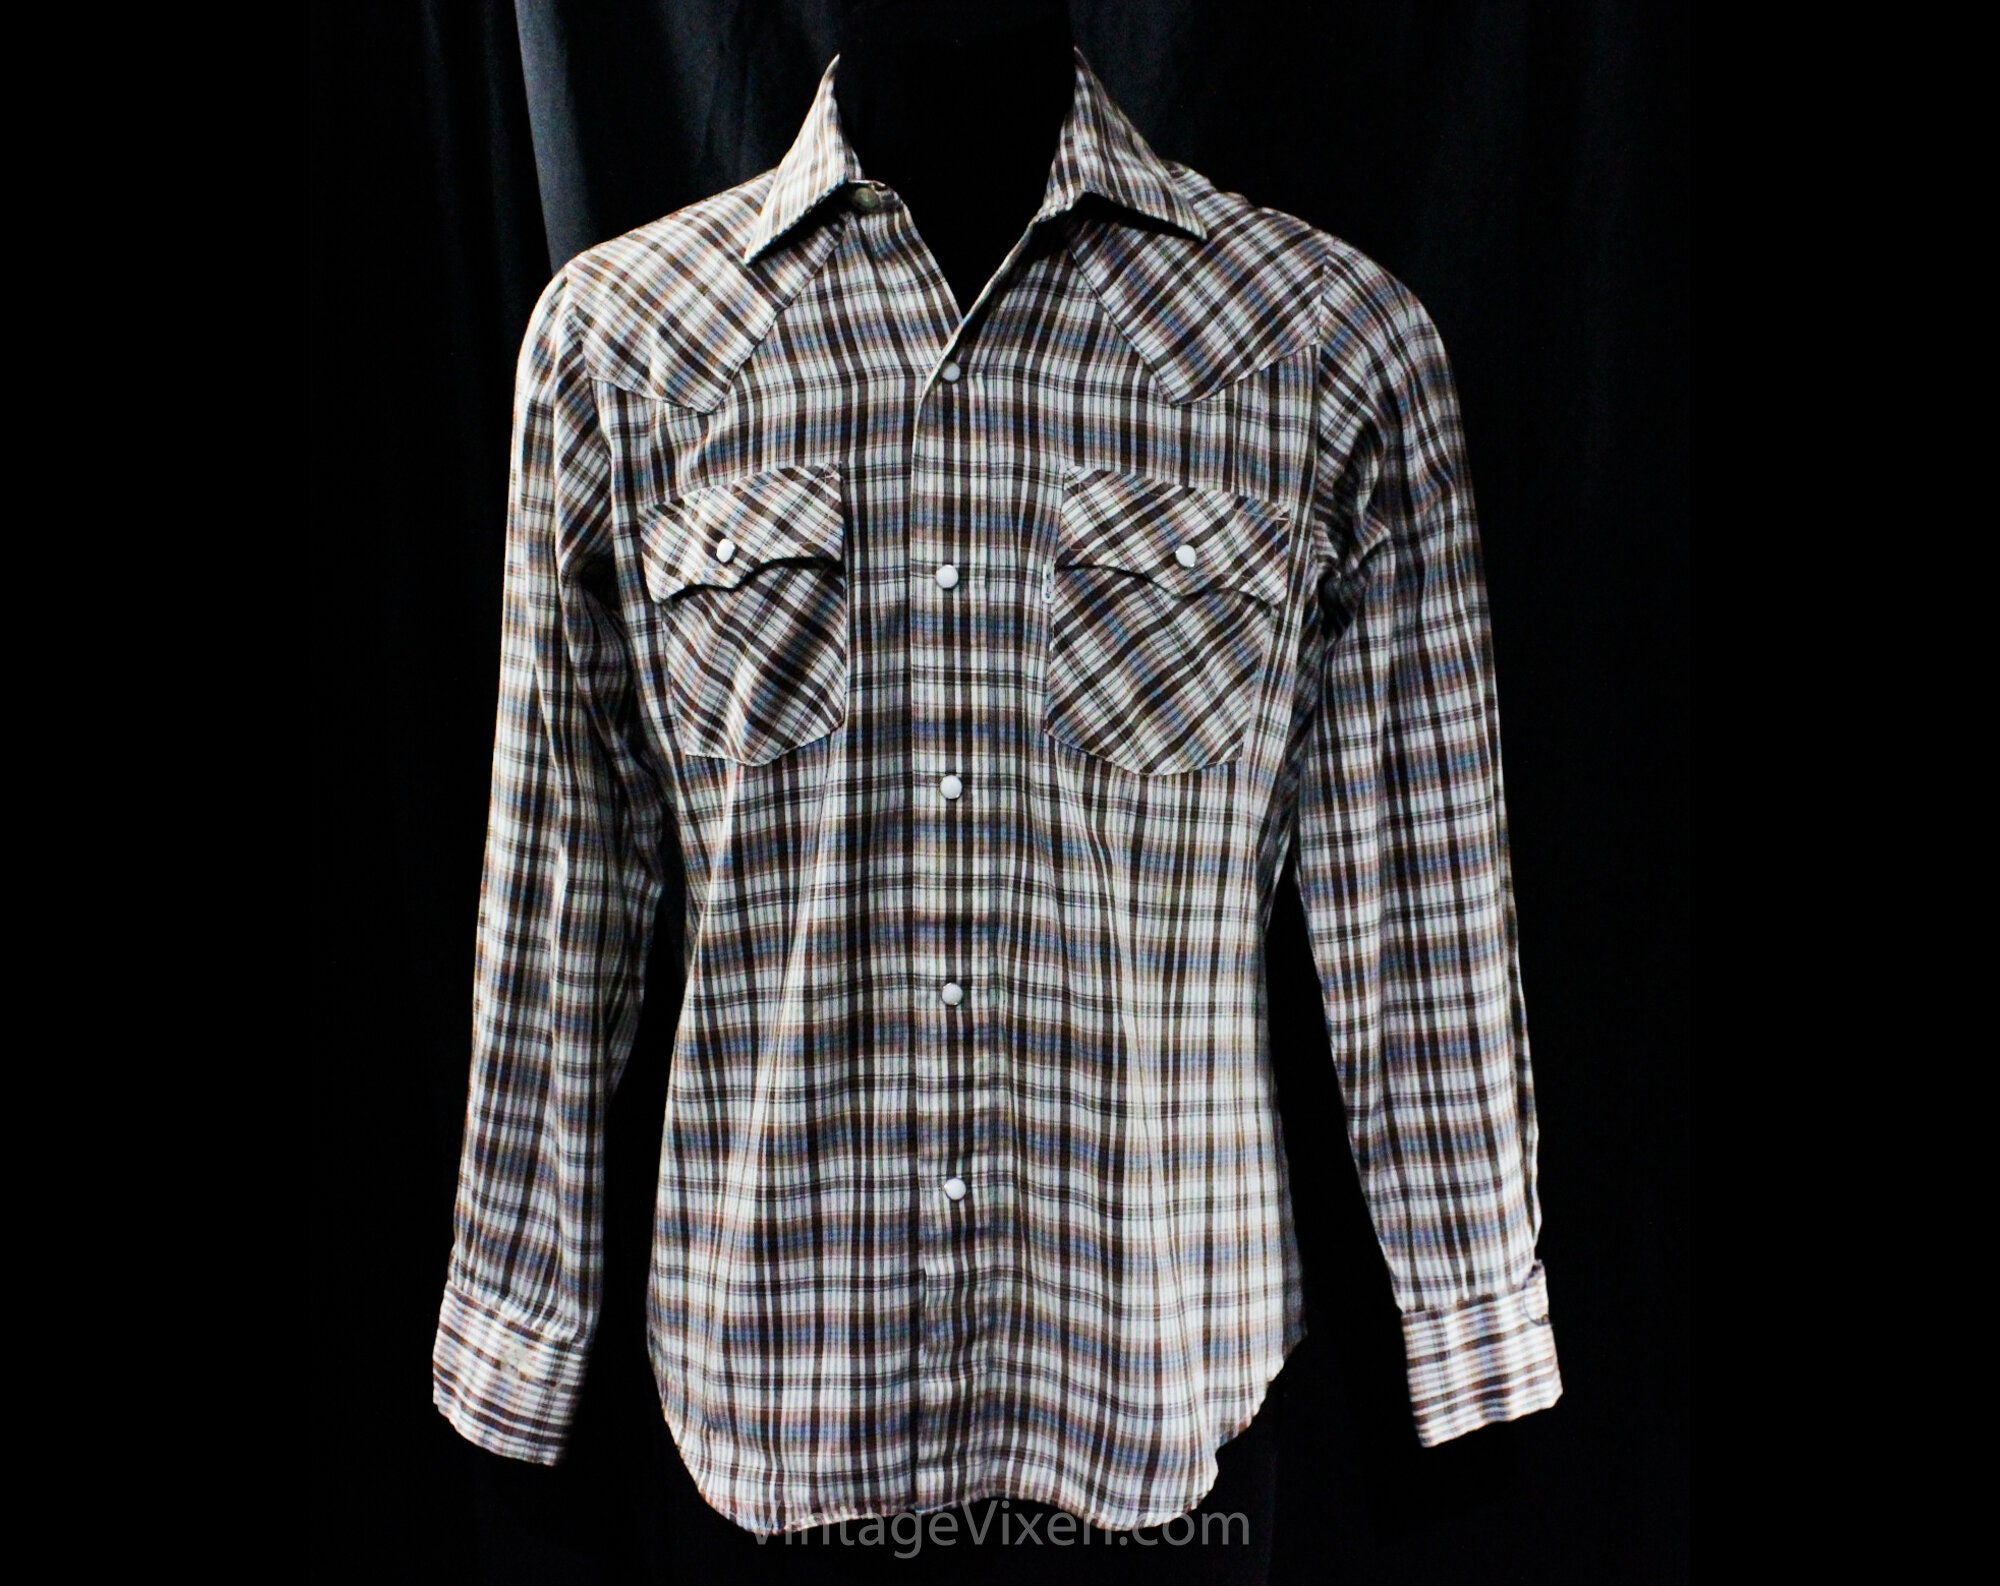 LEVI'S Vintage BIG E Mens Western Shirt Brown Check with Pearl Snaps. –  American Vintage Clothing Co.